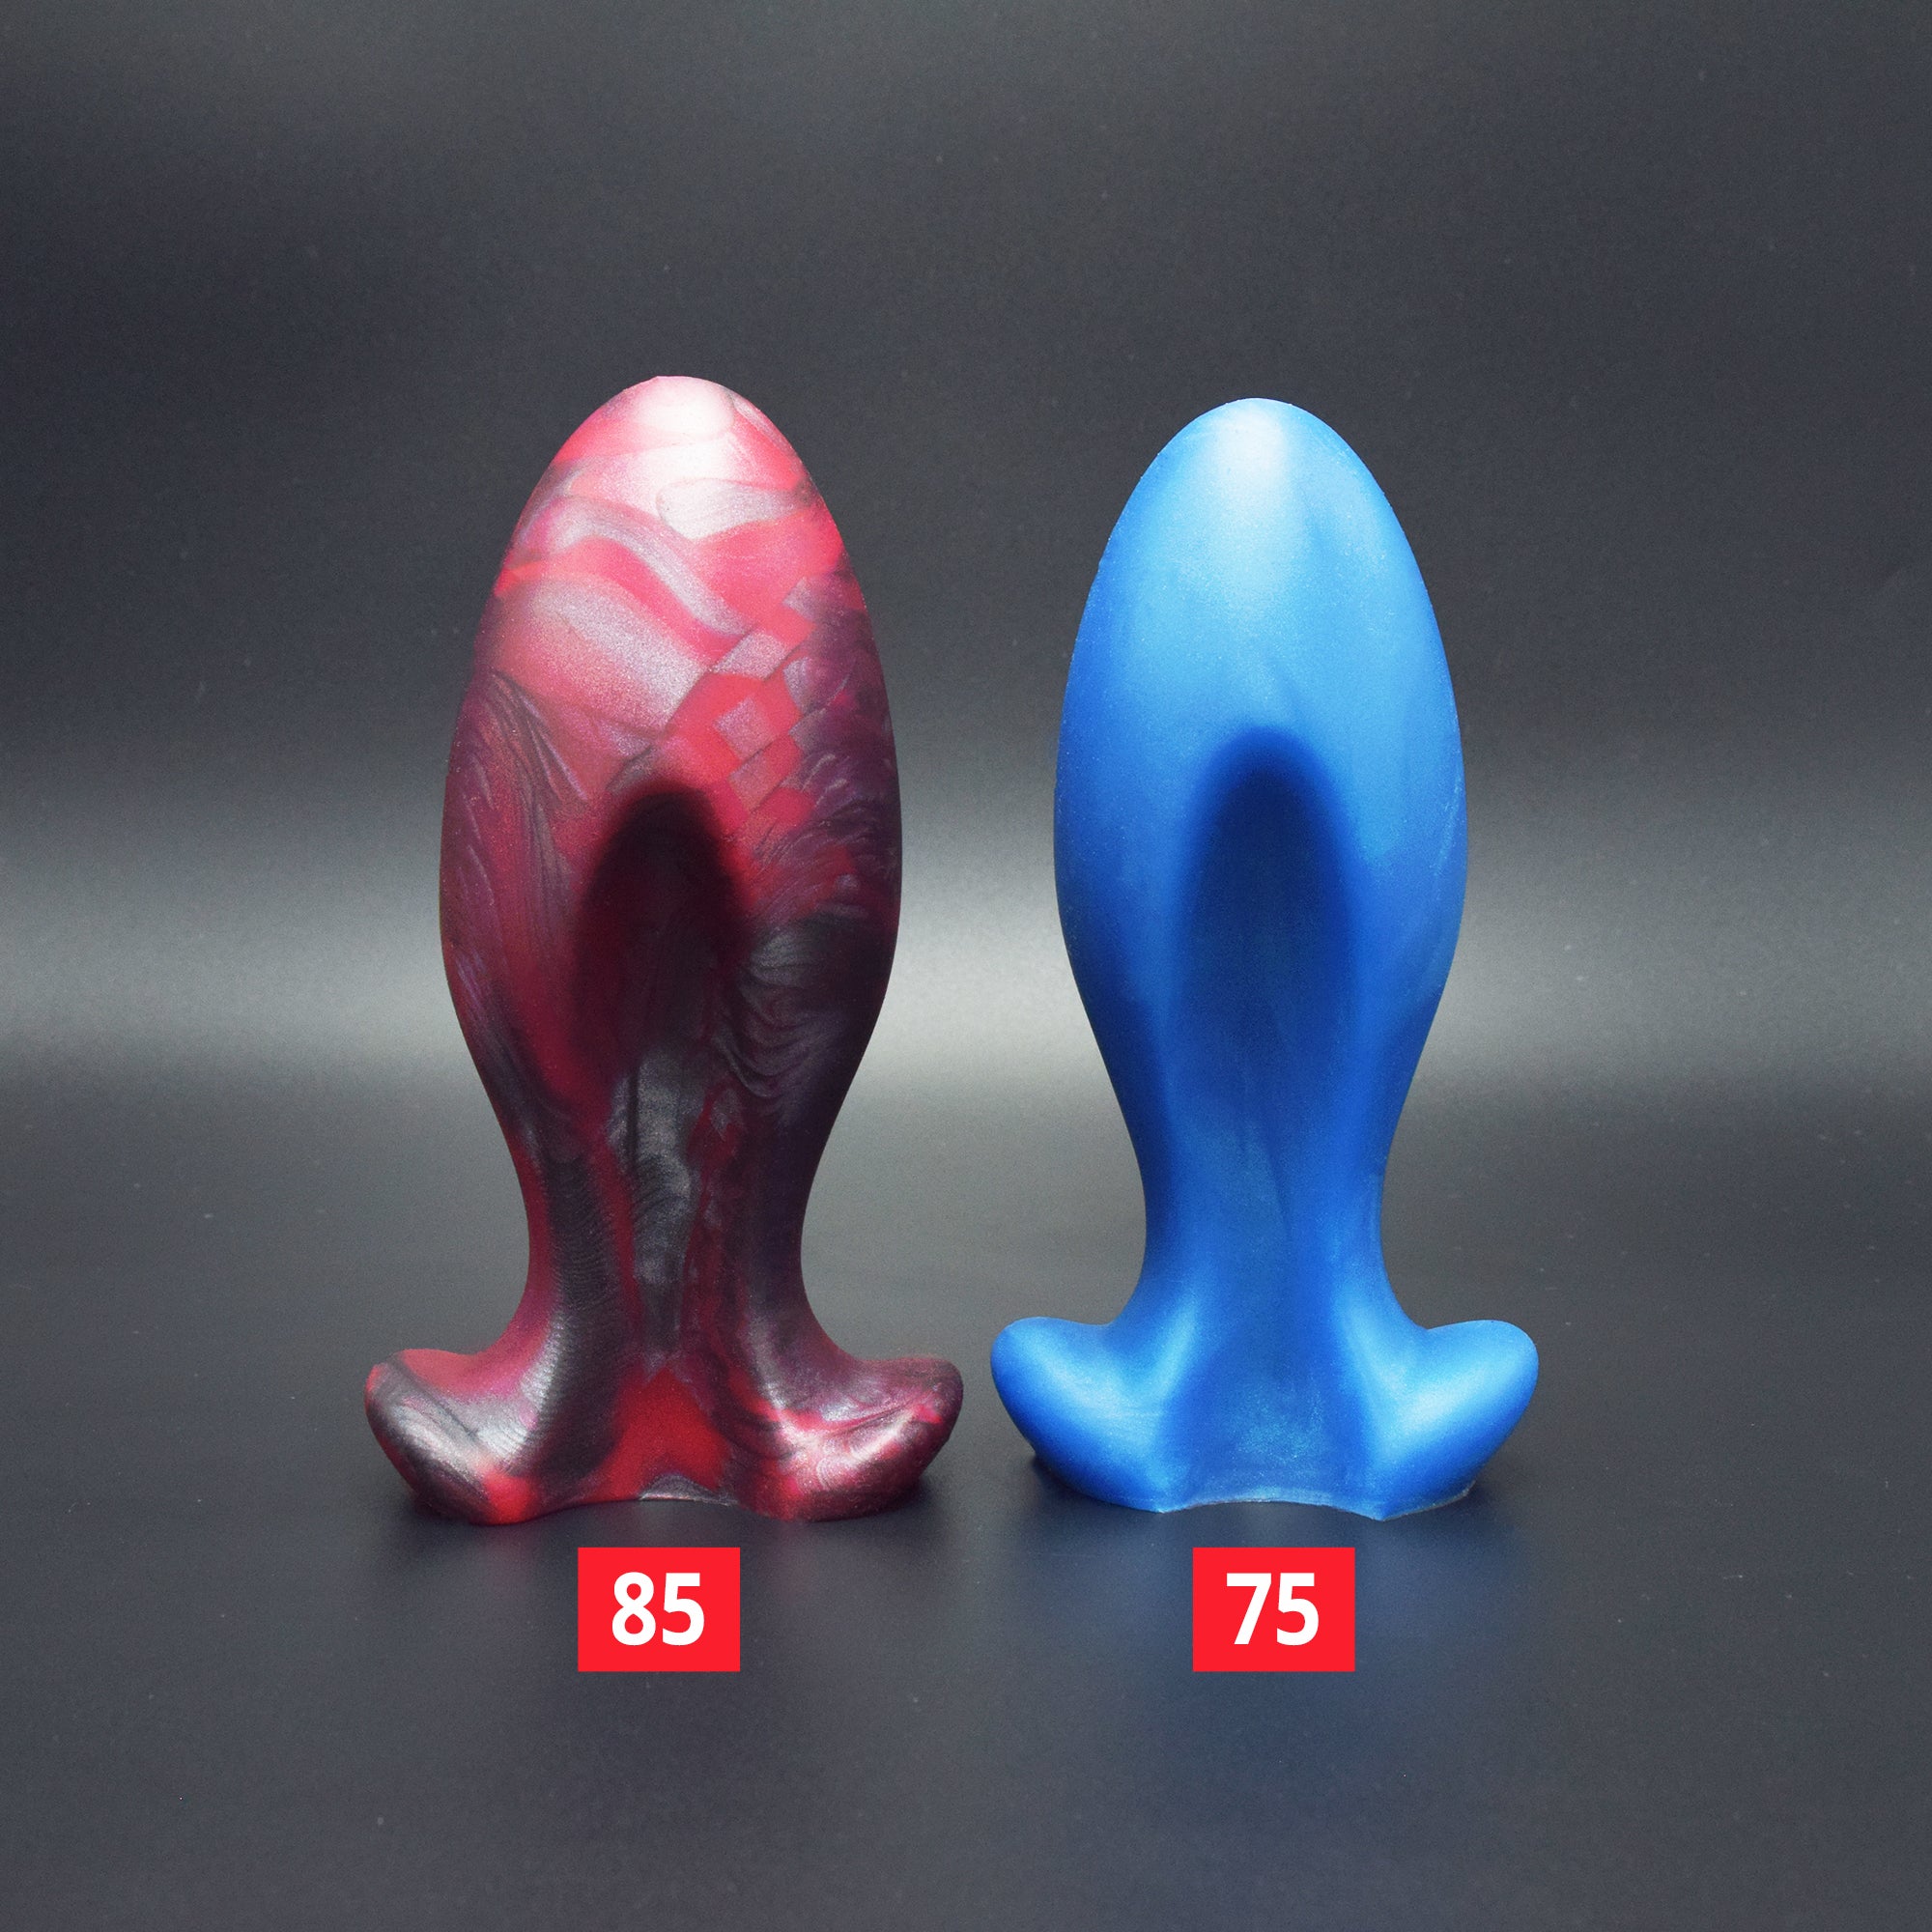 Chute 85 in Forge Red and Chute 75 in Blue Steel facing forward, beside each other for scale